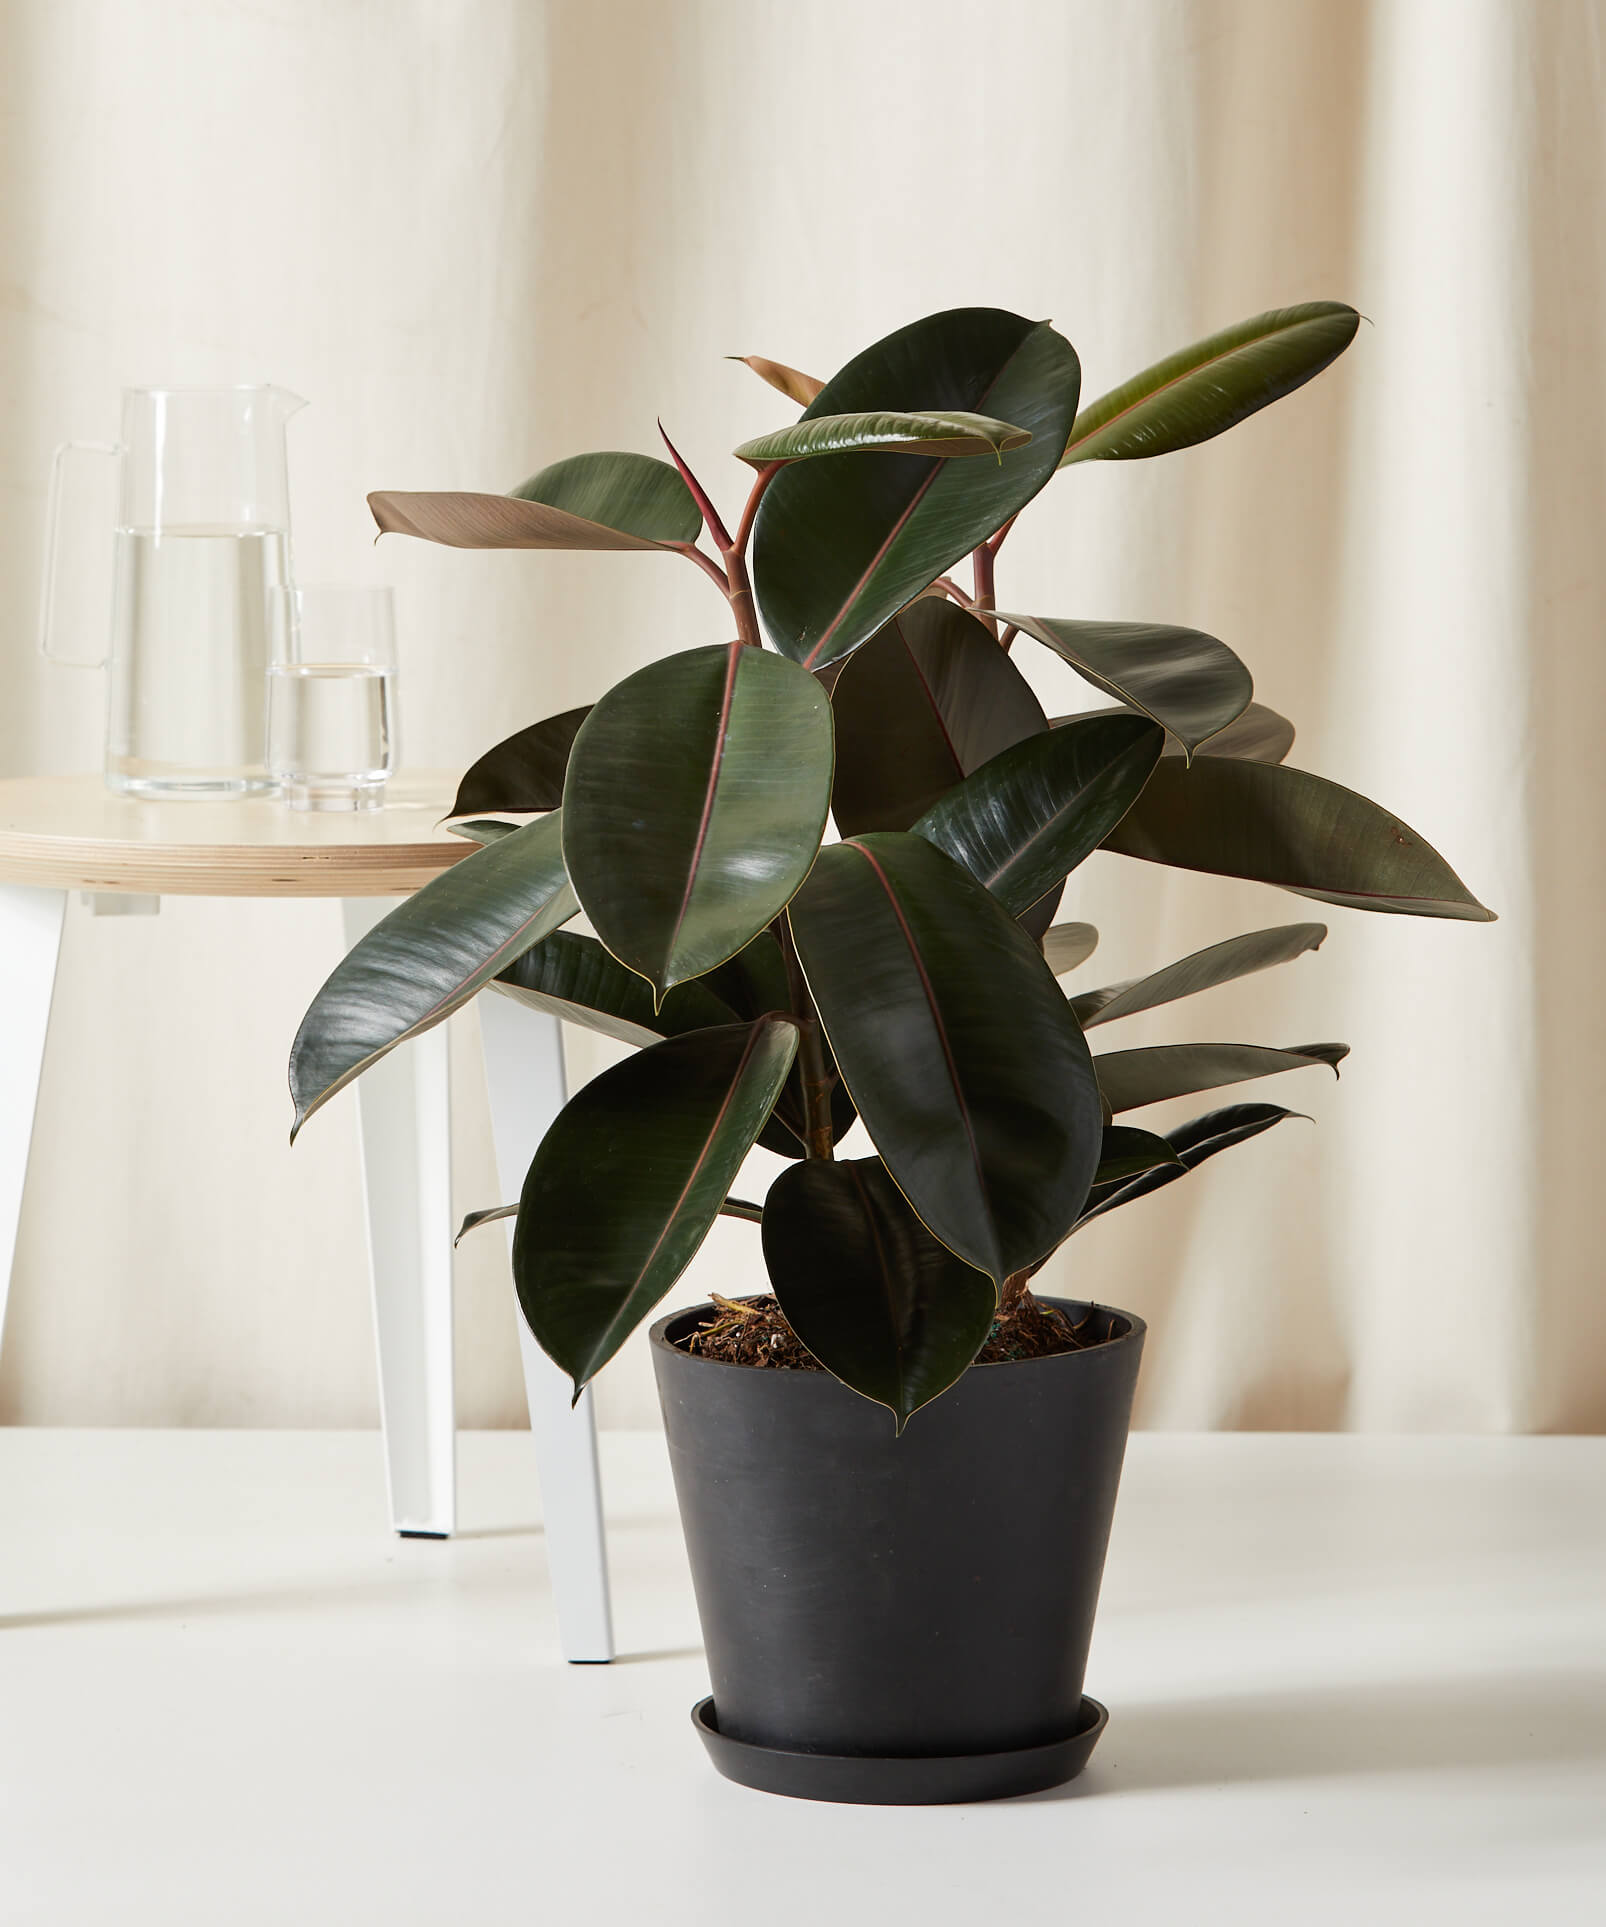 2' Rubber Tree Plant LG | Bloomscape | Burgundy Rubber Tree | Low Maintenance Plants Indoors | Plant Delivery | Ficus Elastica Burgundy